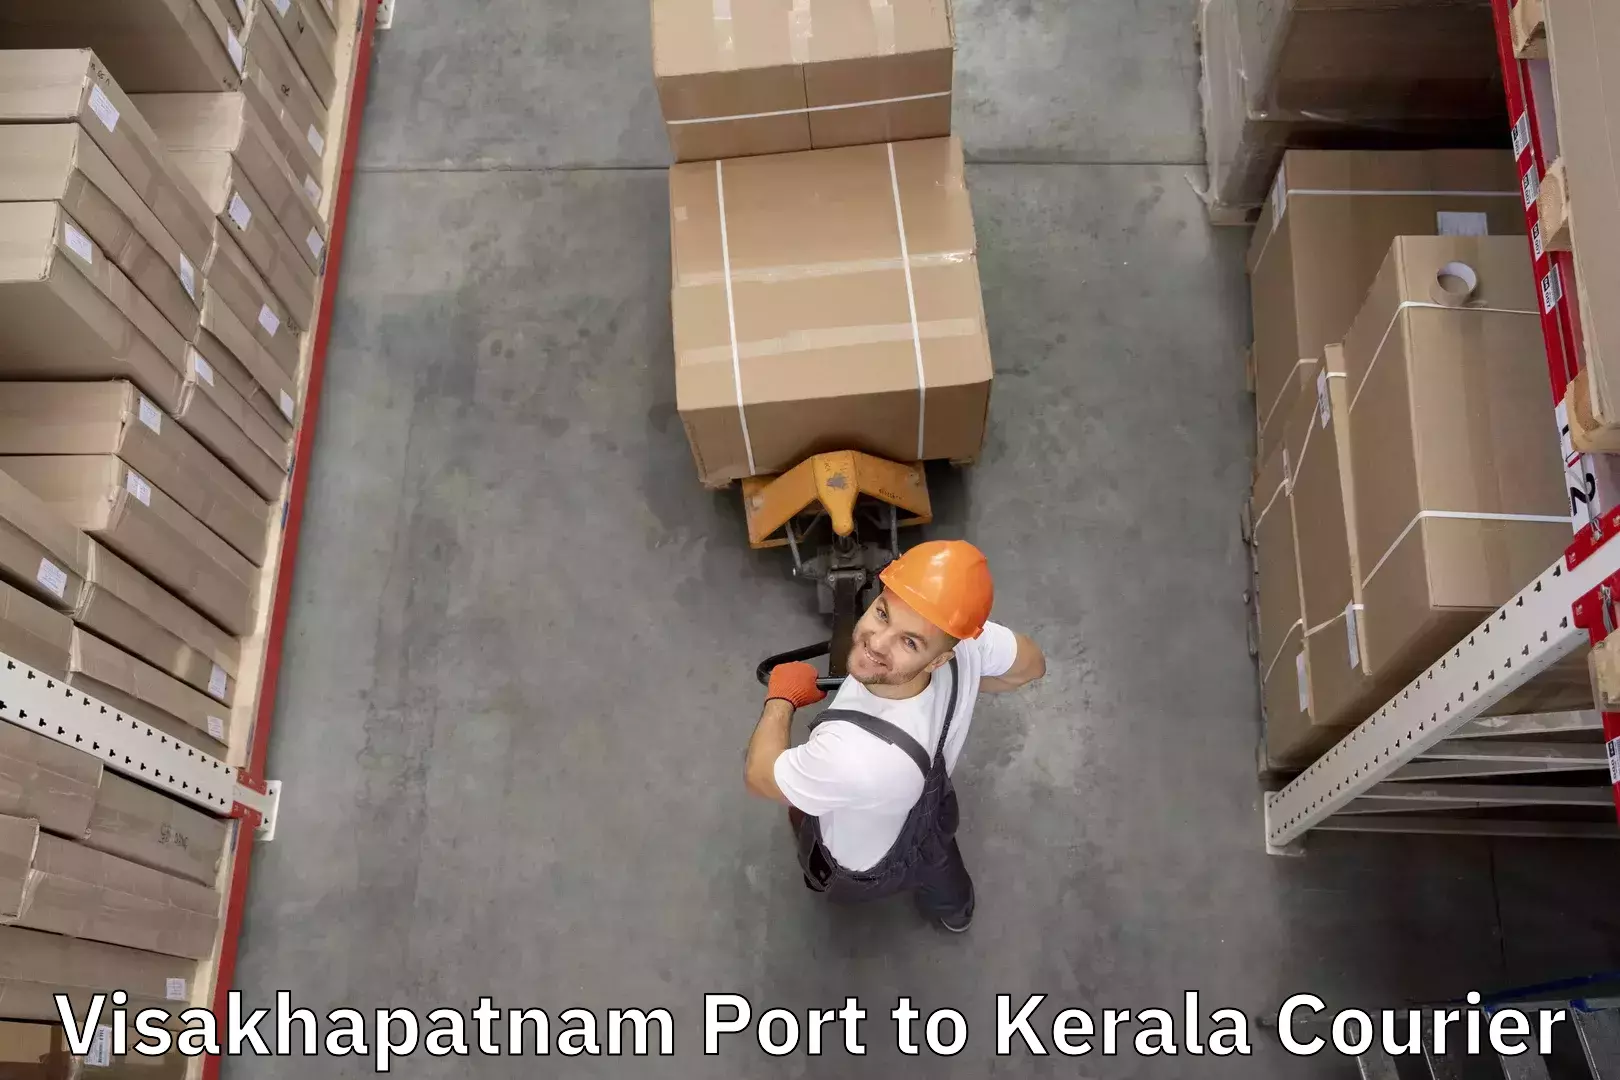 Baggage transport management Visakhapatnam Port to Cochin University of Science and Technology